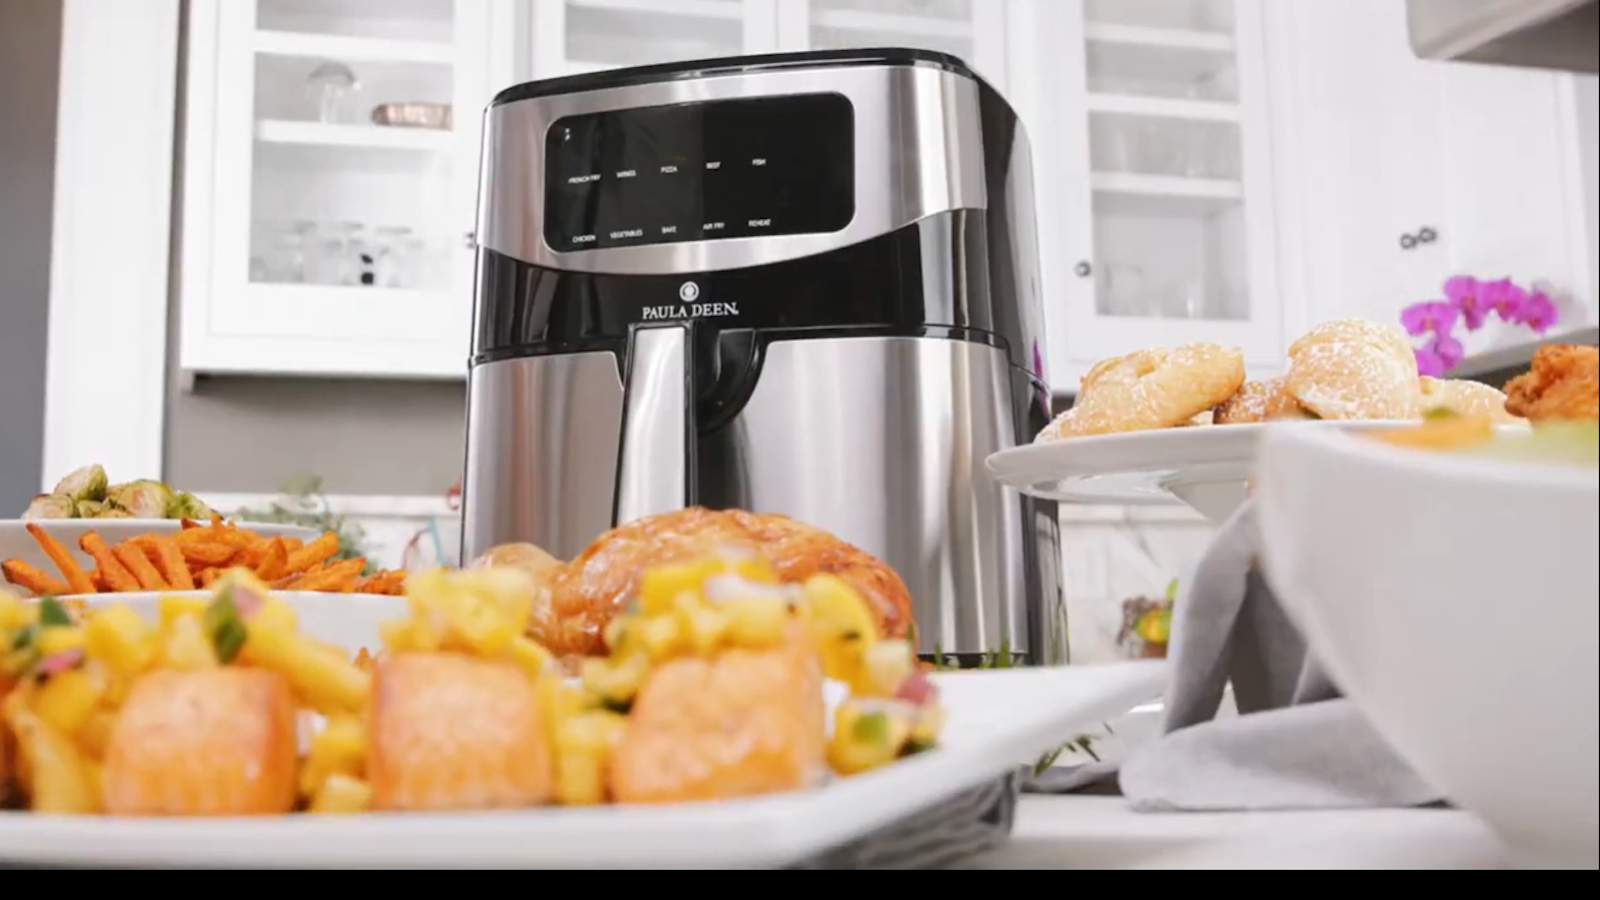 This Paula Deen digital air fryer is 46% off right now during this special sale